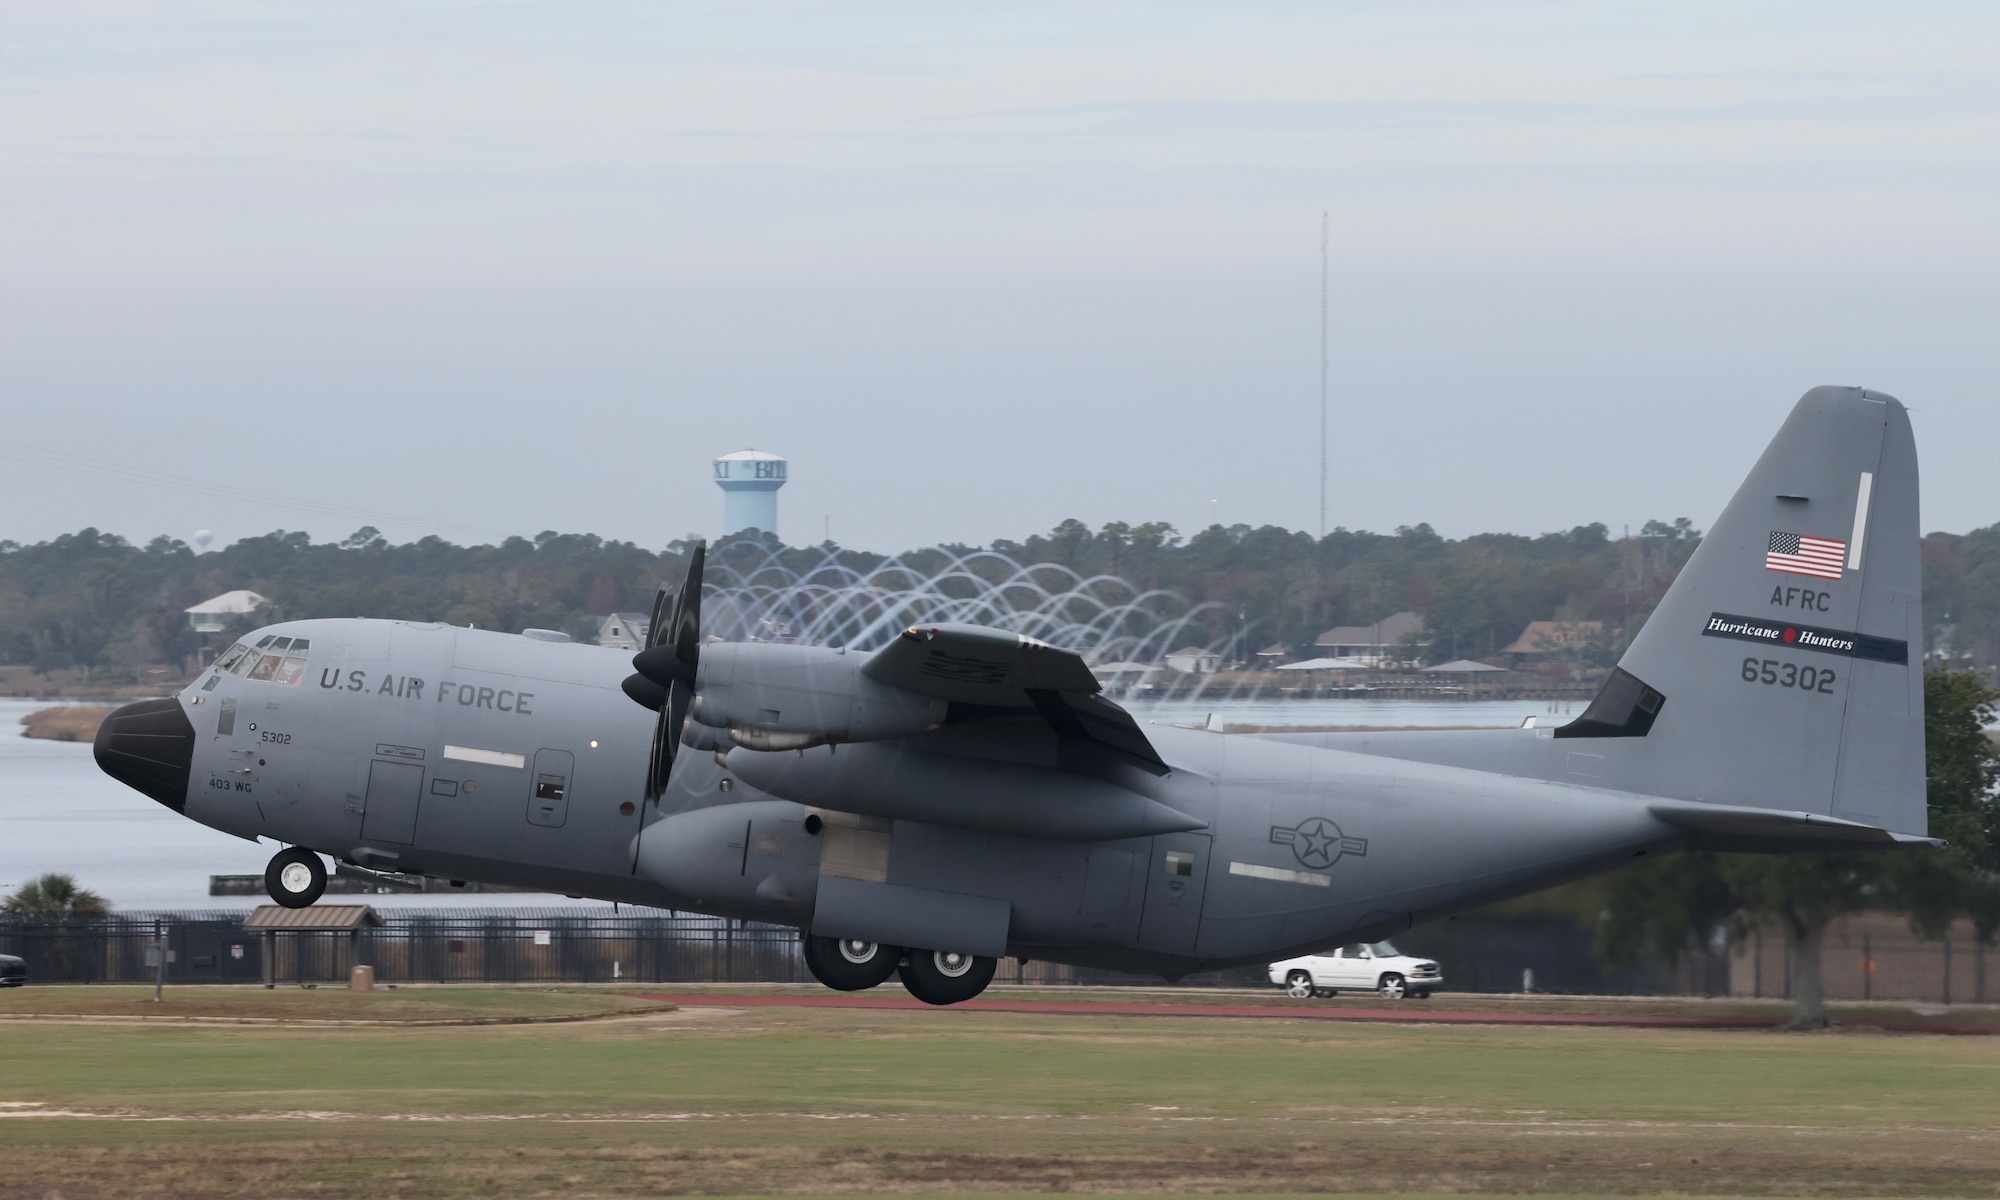 A WC-130J aircraft takes off